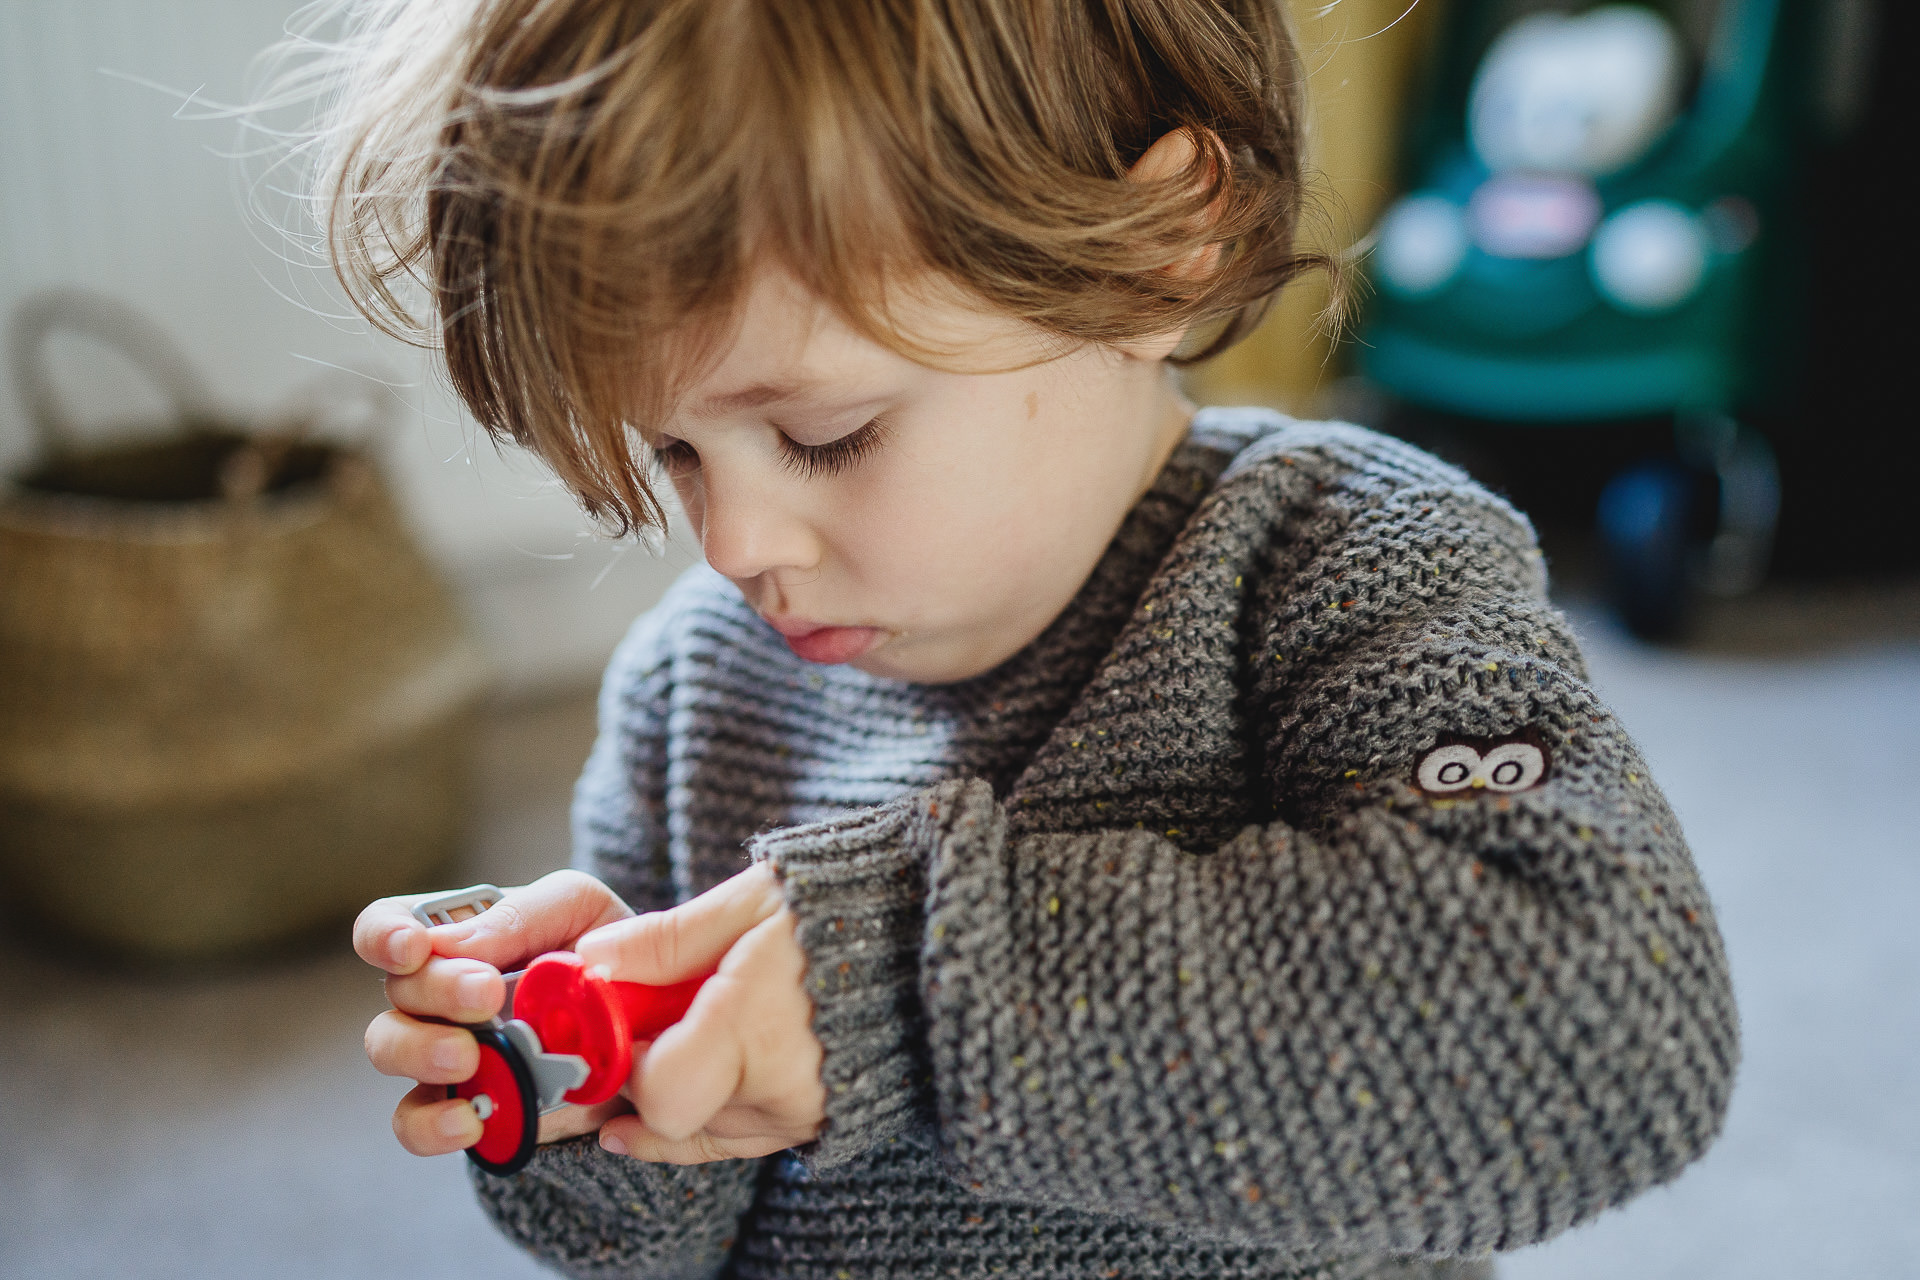 A small boy concentrating on a toy